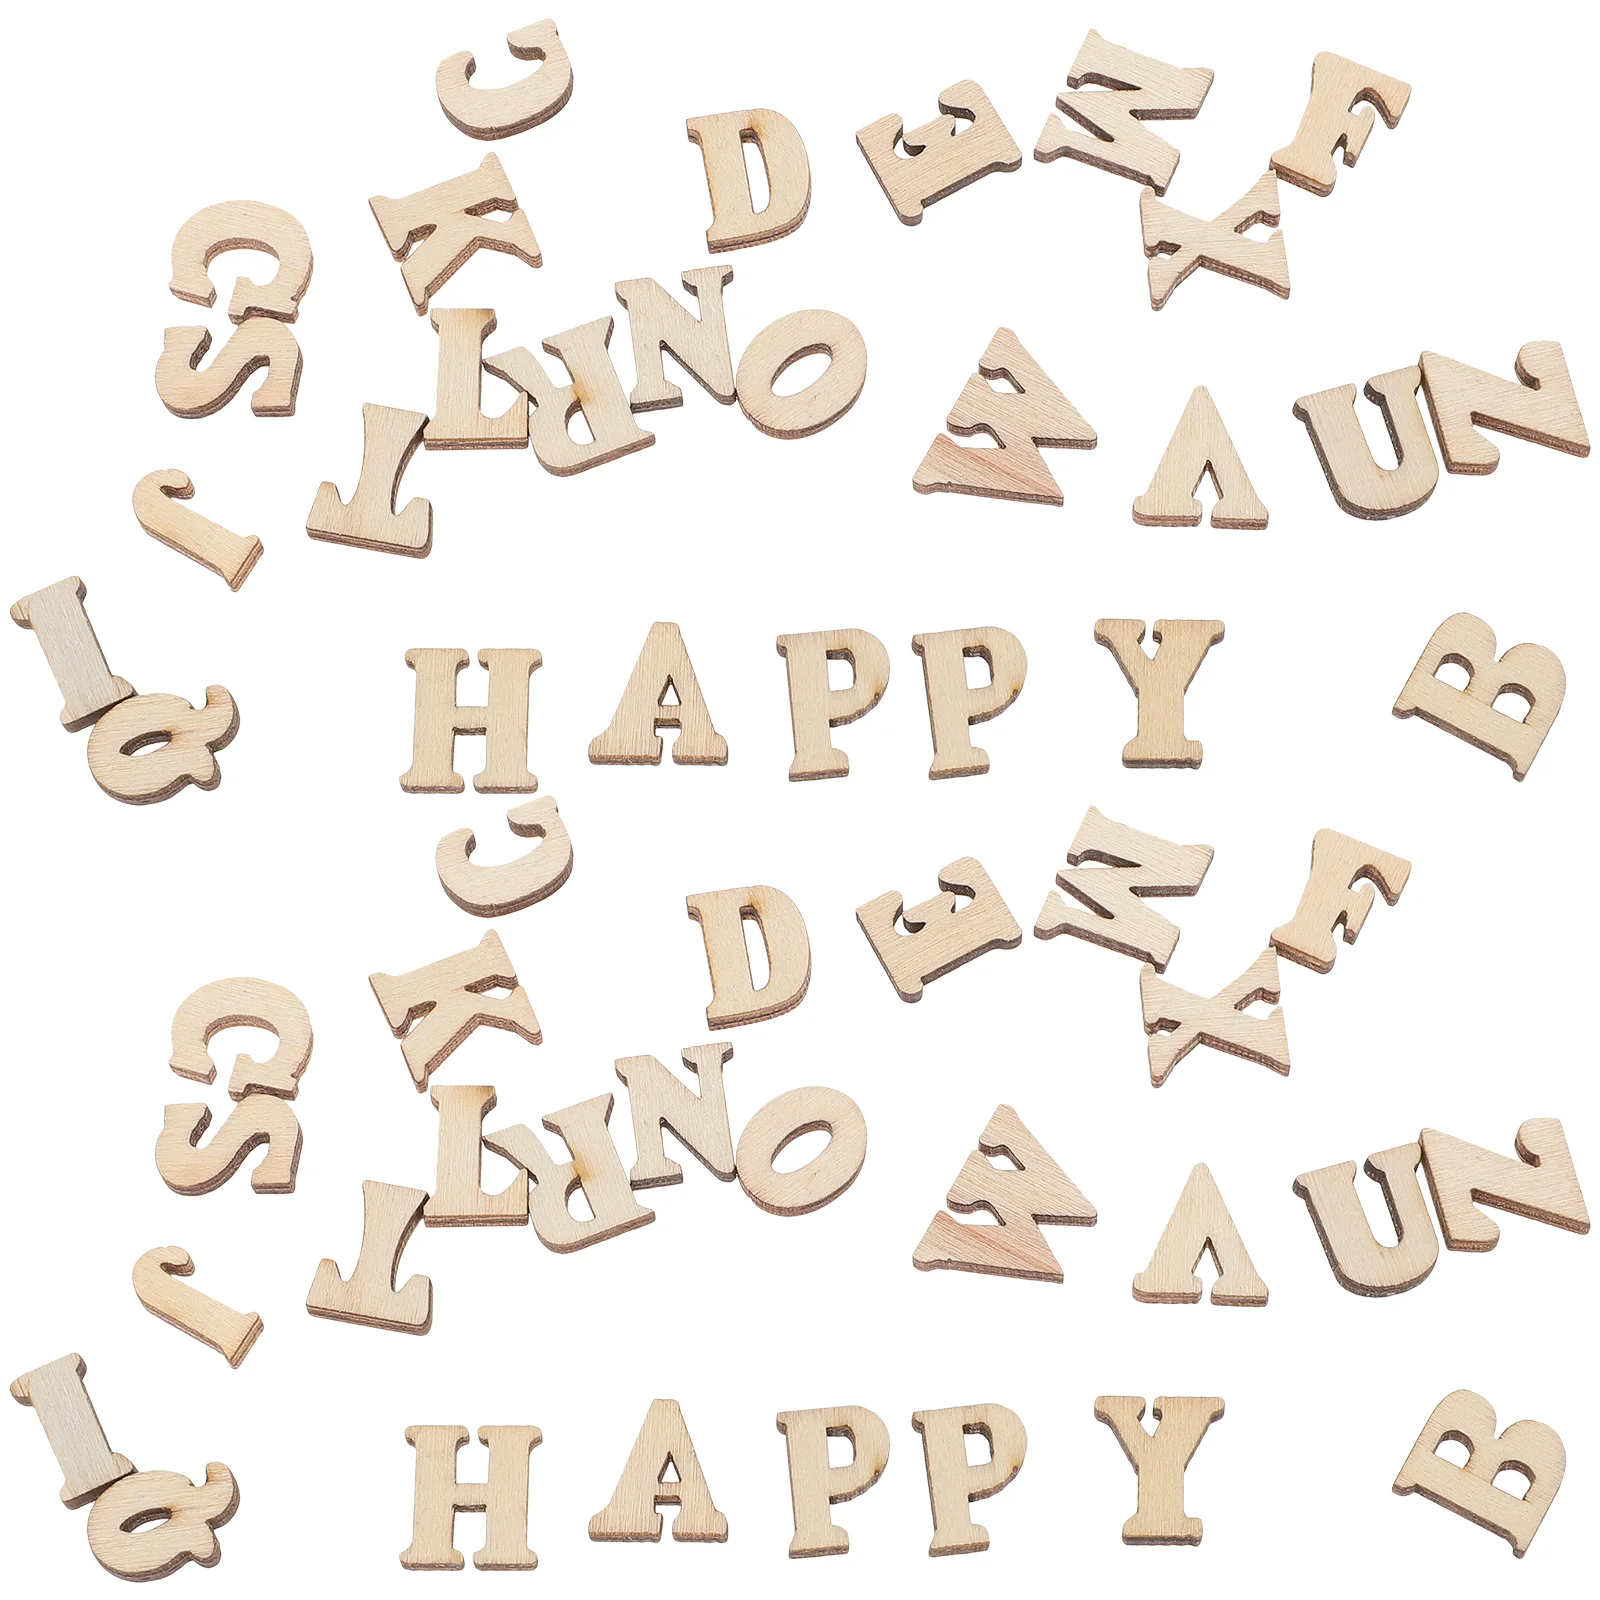 

Wooden Letters Wood Slice Crafts Craft Alphabet Letter Embellishments Unfinished Christmas Material Diy Mini Decor Cutouts